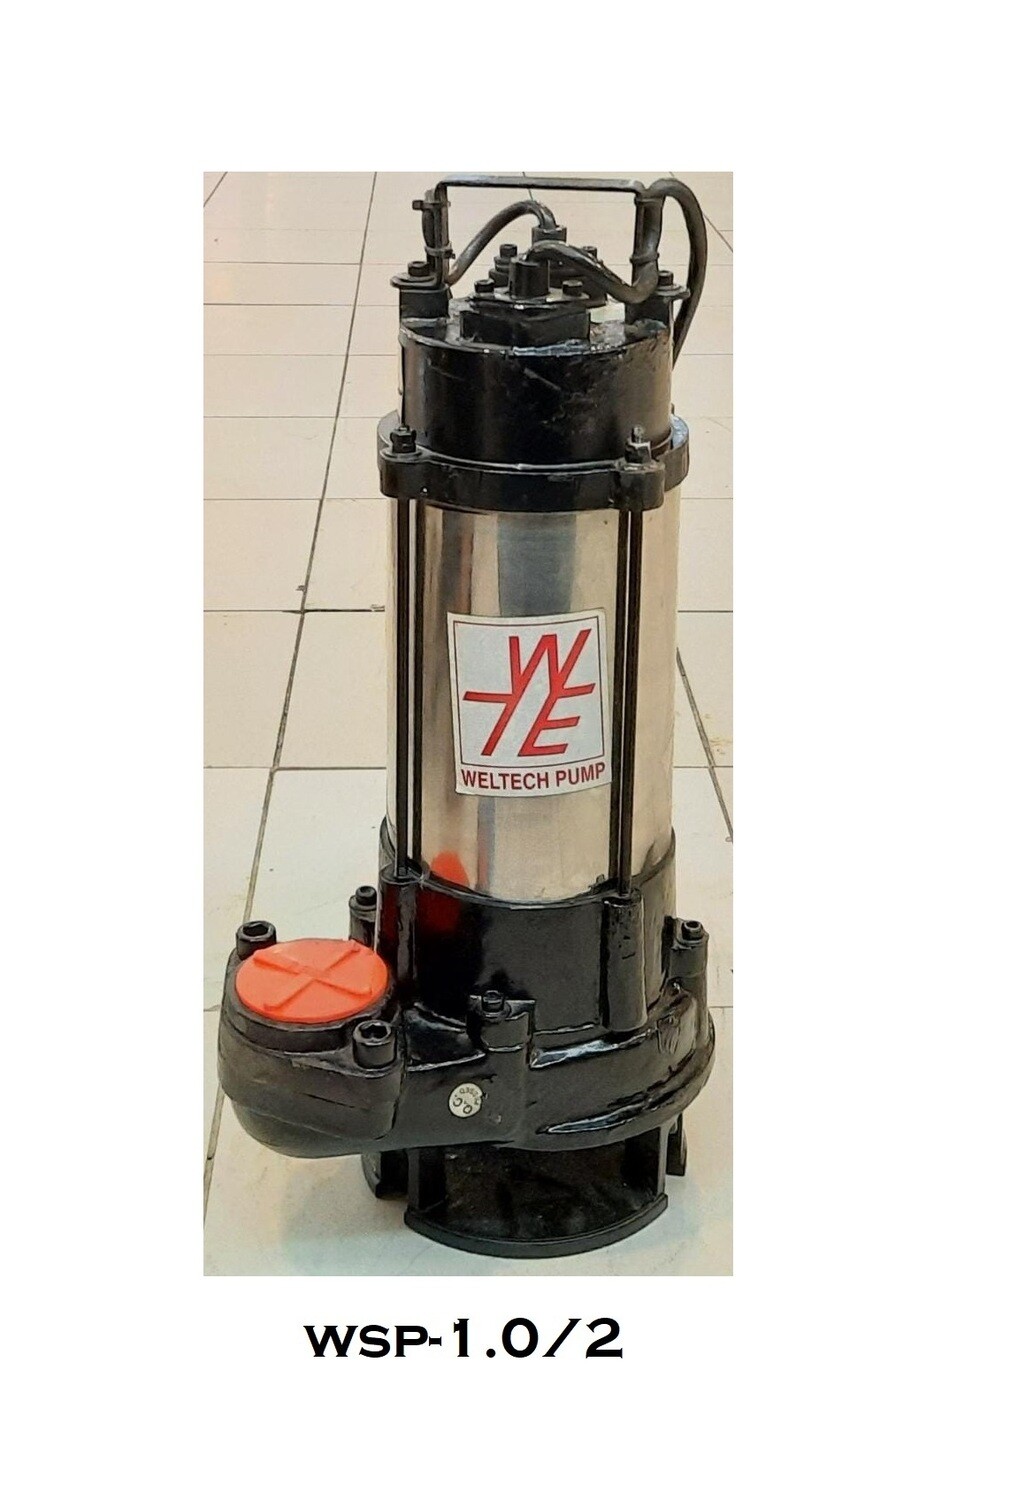 Openwell Submersible Pump WSP-1.0/2 Pompa Celup Air Kotor